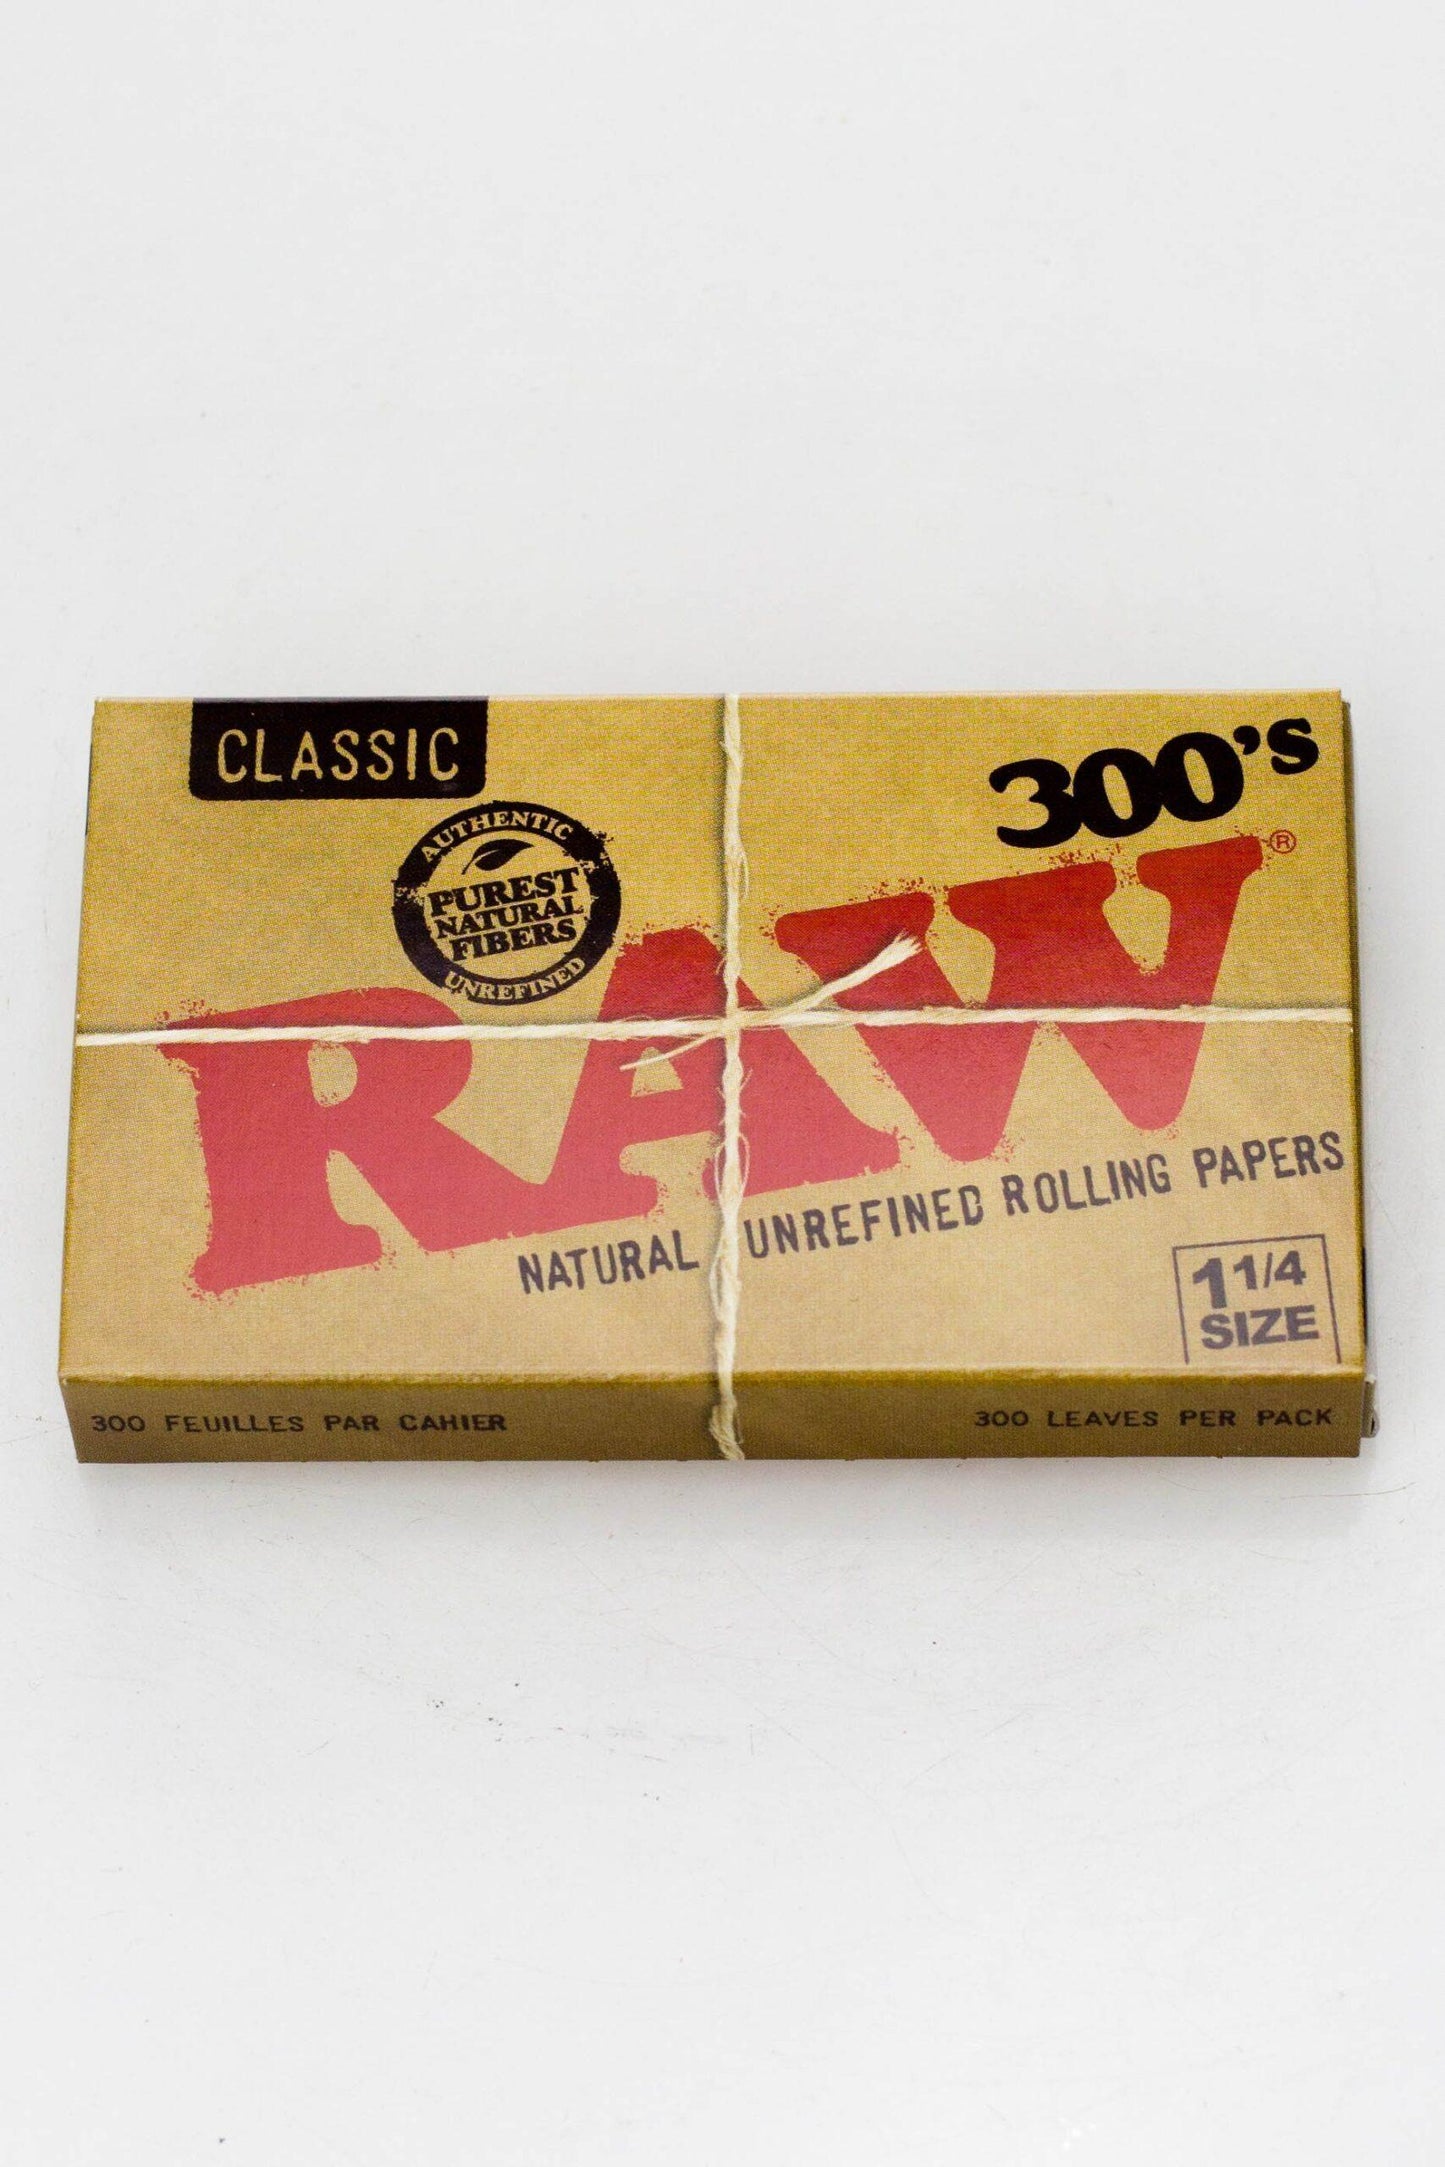 RAW 300's. Natural Unrefined-2 Packs